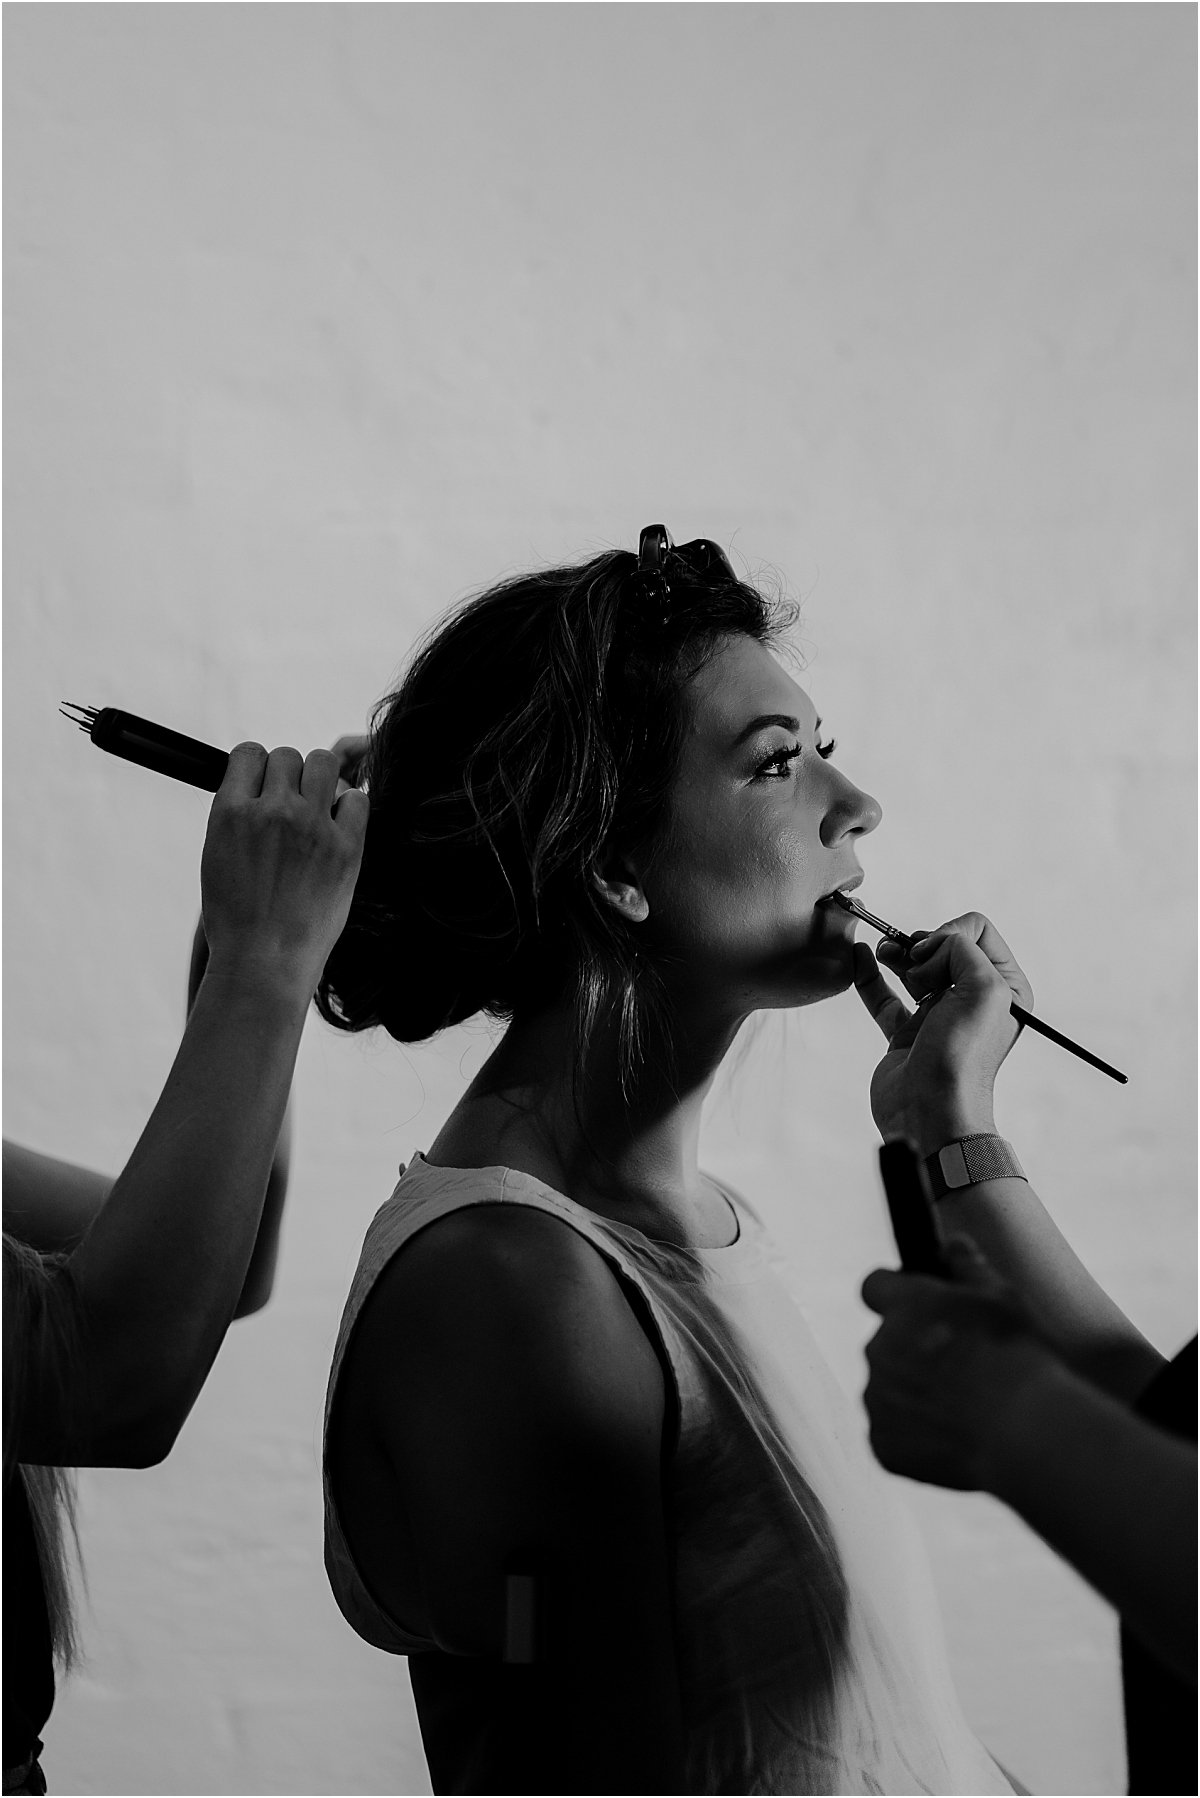 Bride getting hair and makeup done at the same time, side profile image